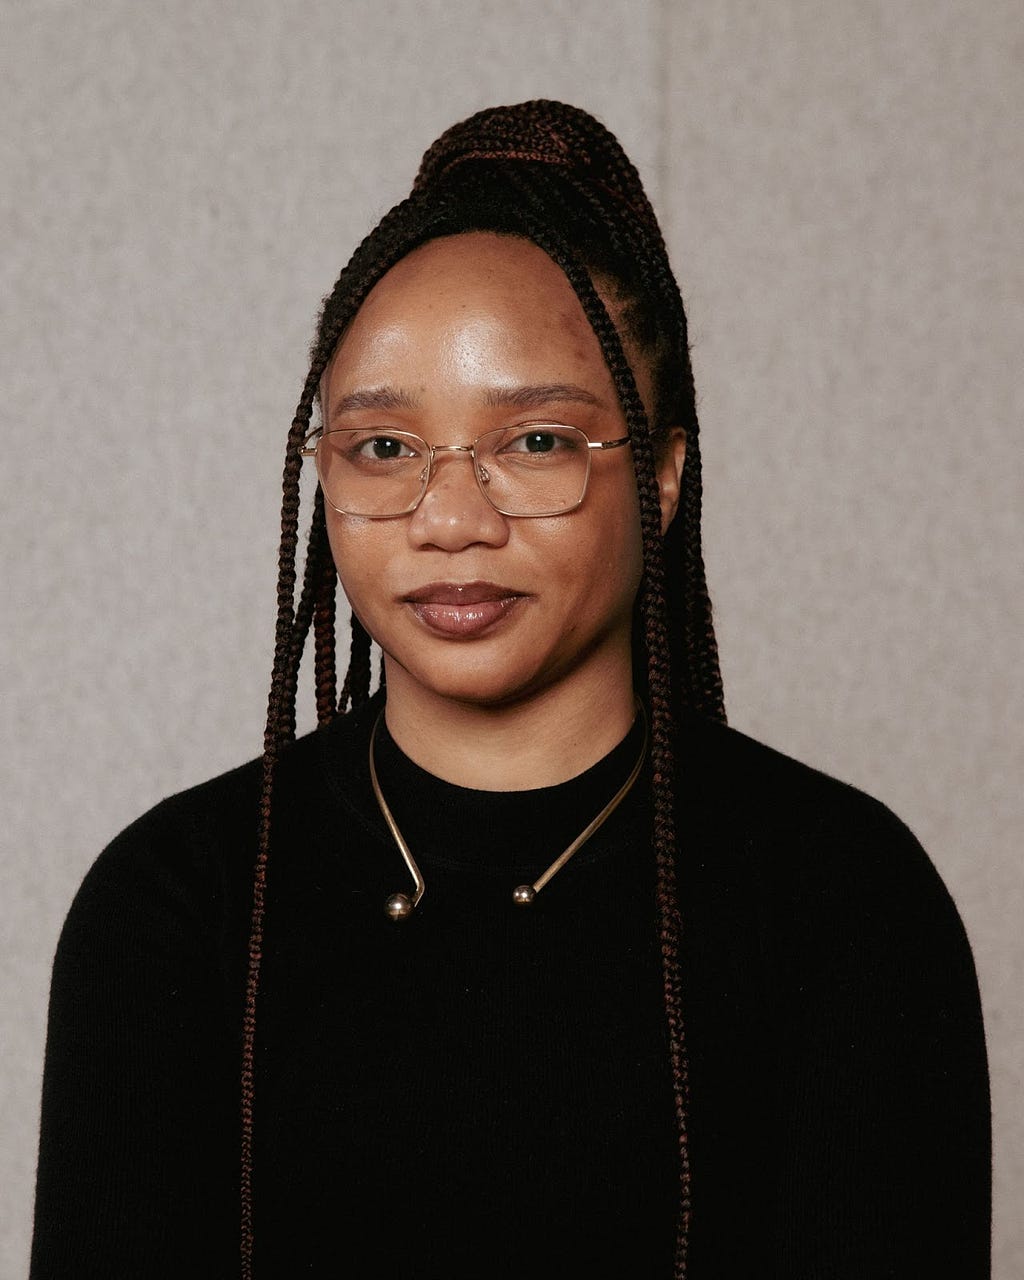 A portrait of Minne Atairu. Minne is wearing a black long-sleeve shirt. Her braided hair is styled in a high ponytail. She has prescription glasses with golden rims and a golden choker around her neck.